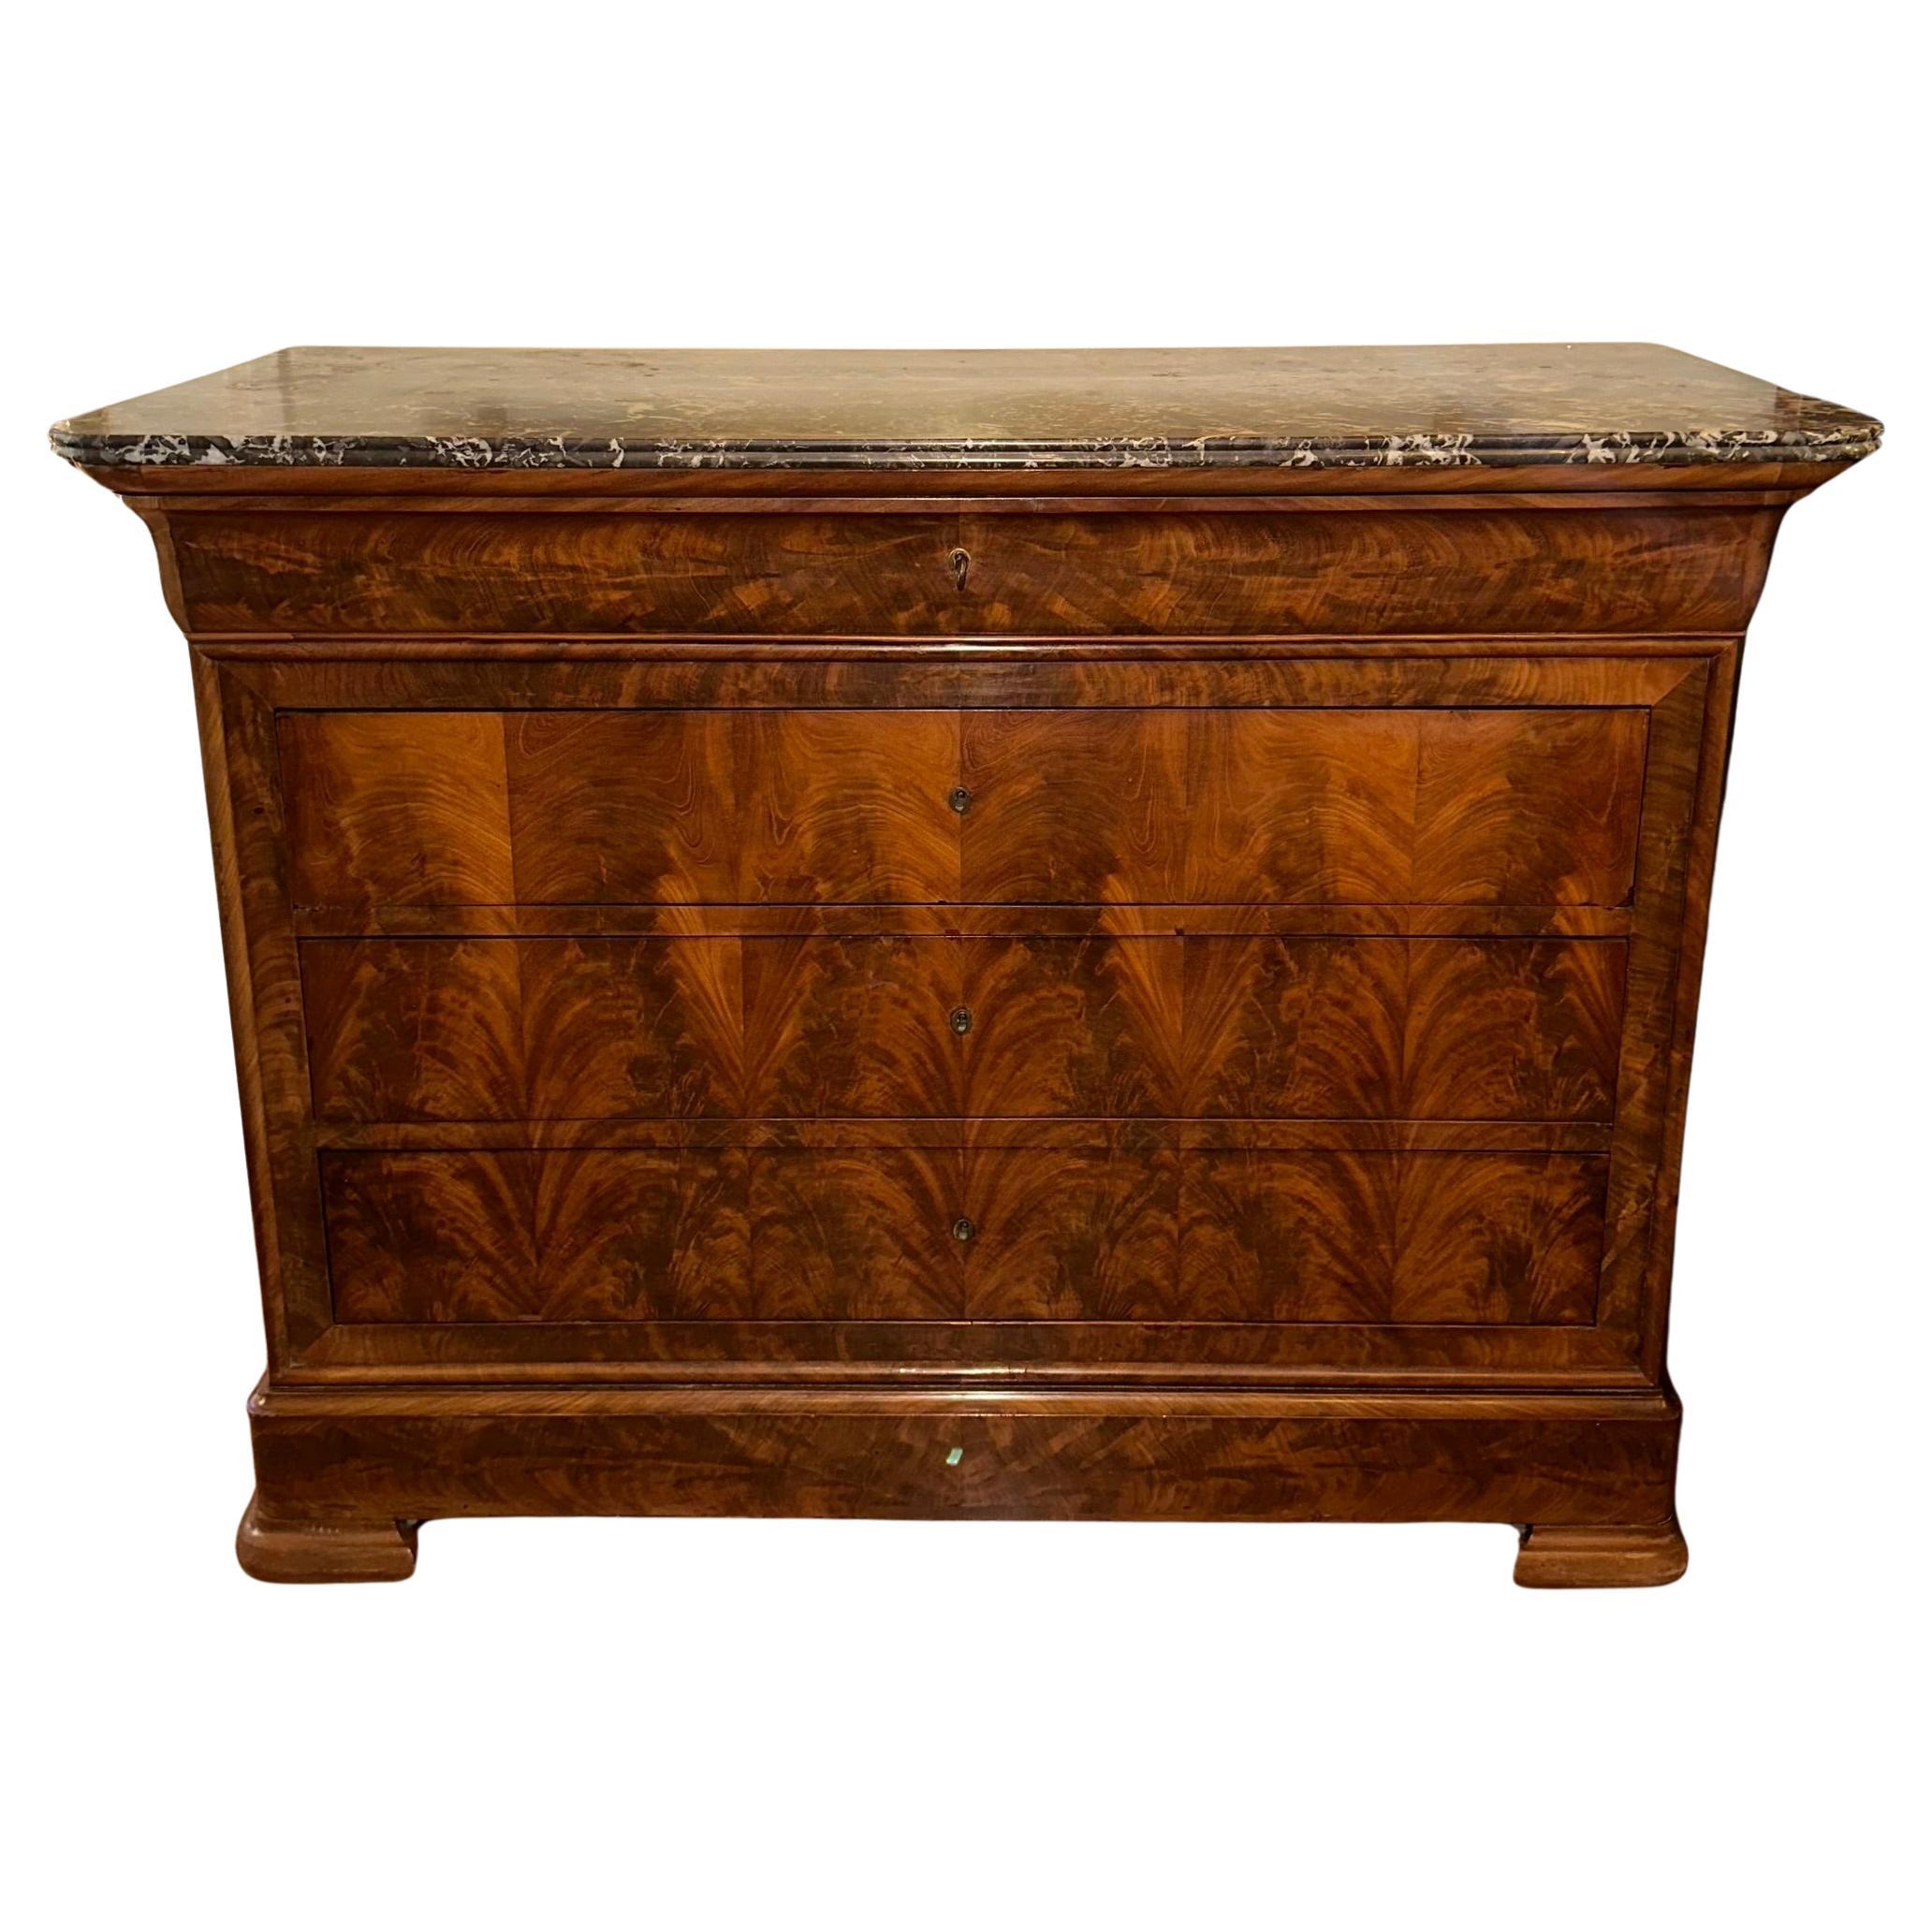 Antique French Louis Philippe Marble Top Mahogany Chest, Circa 1840-1850.